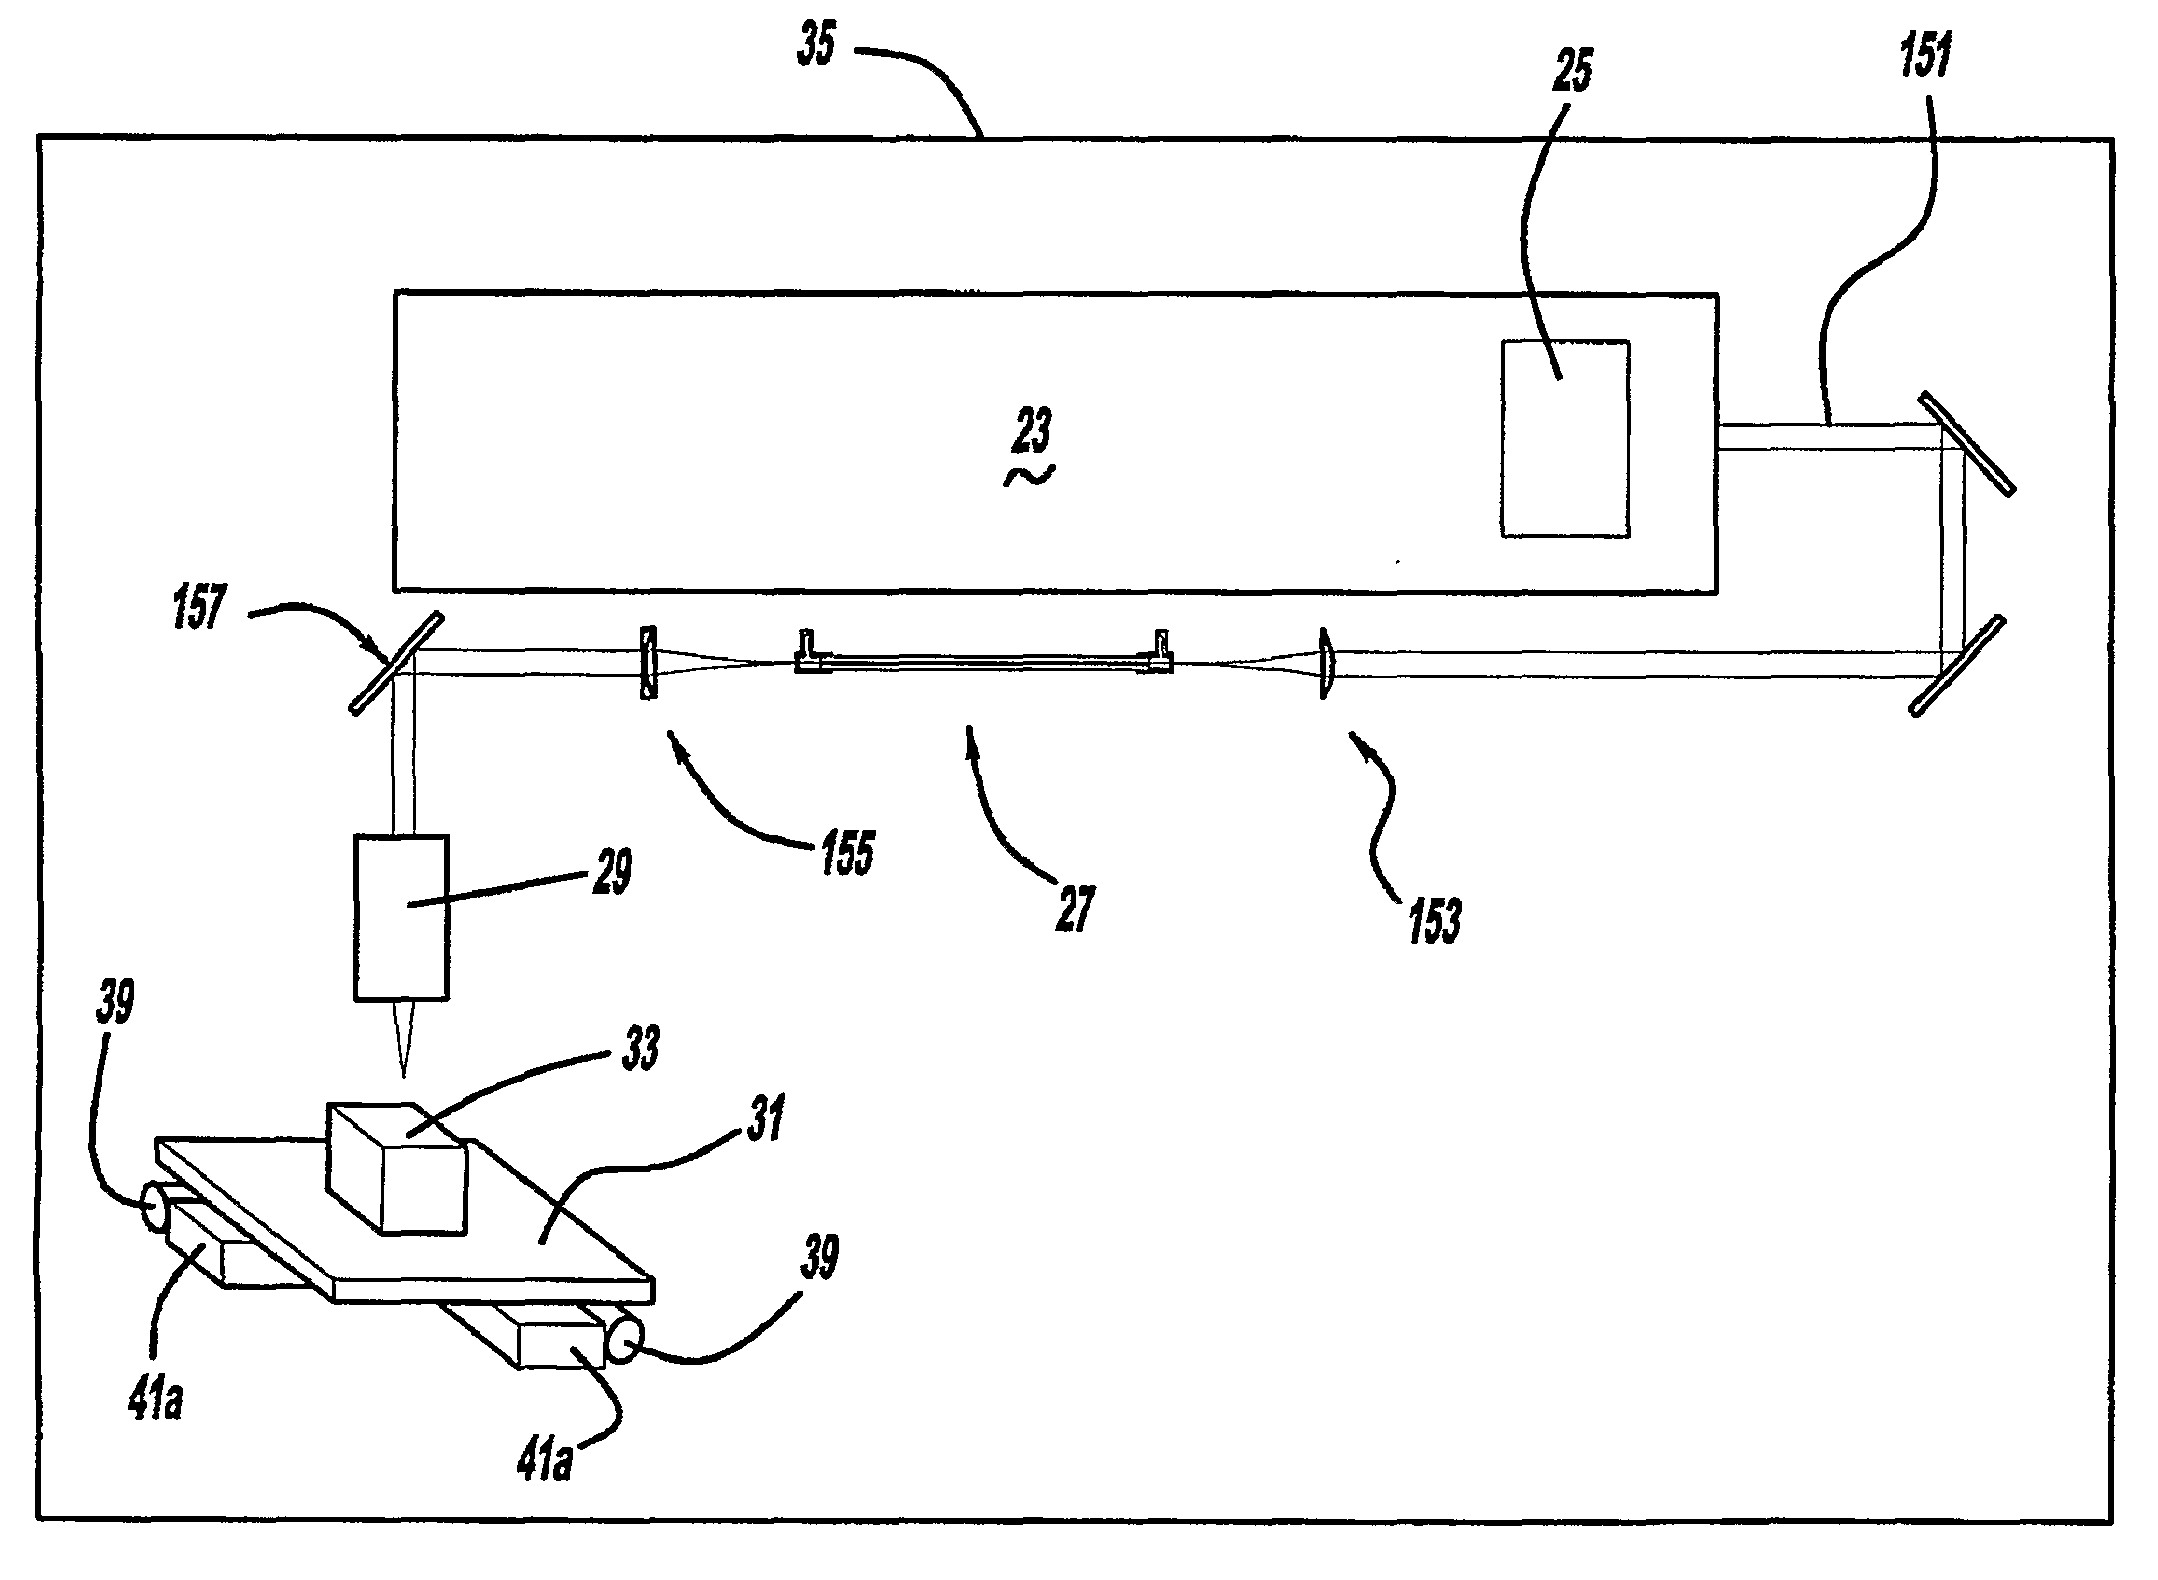 Laser Material Processing System